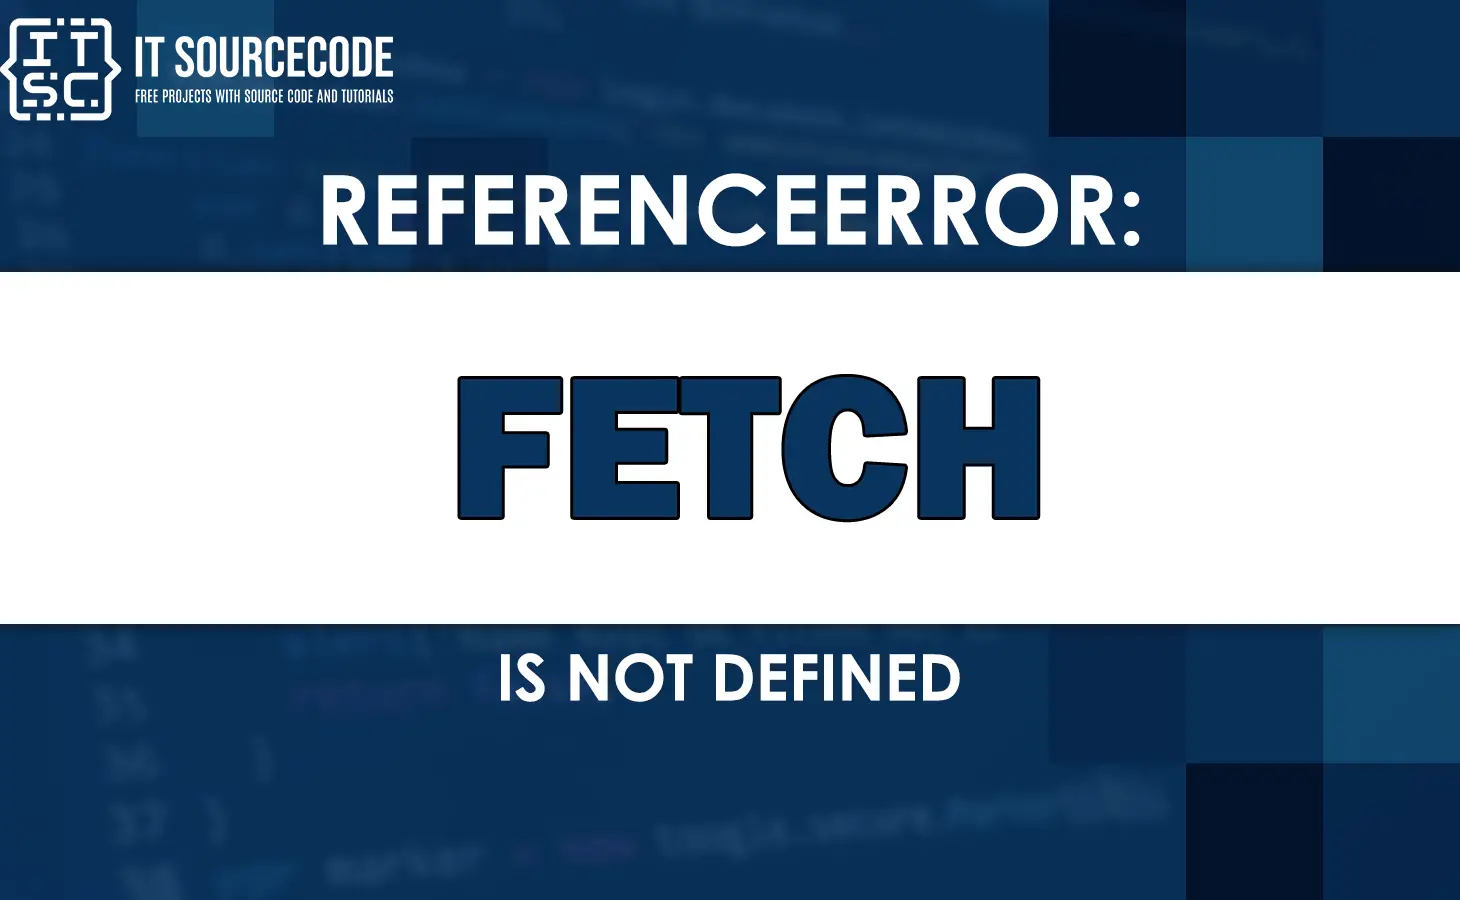 referenceerror fetch is not defined